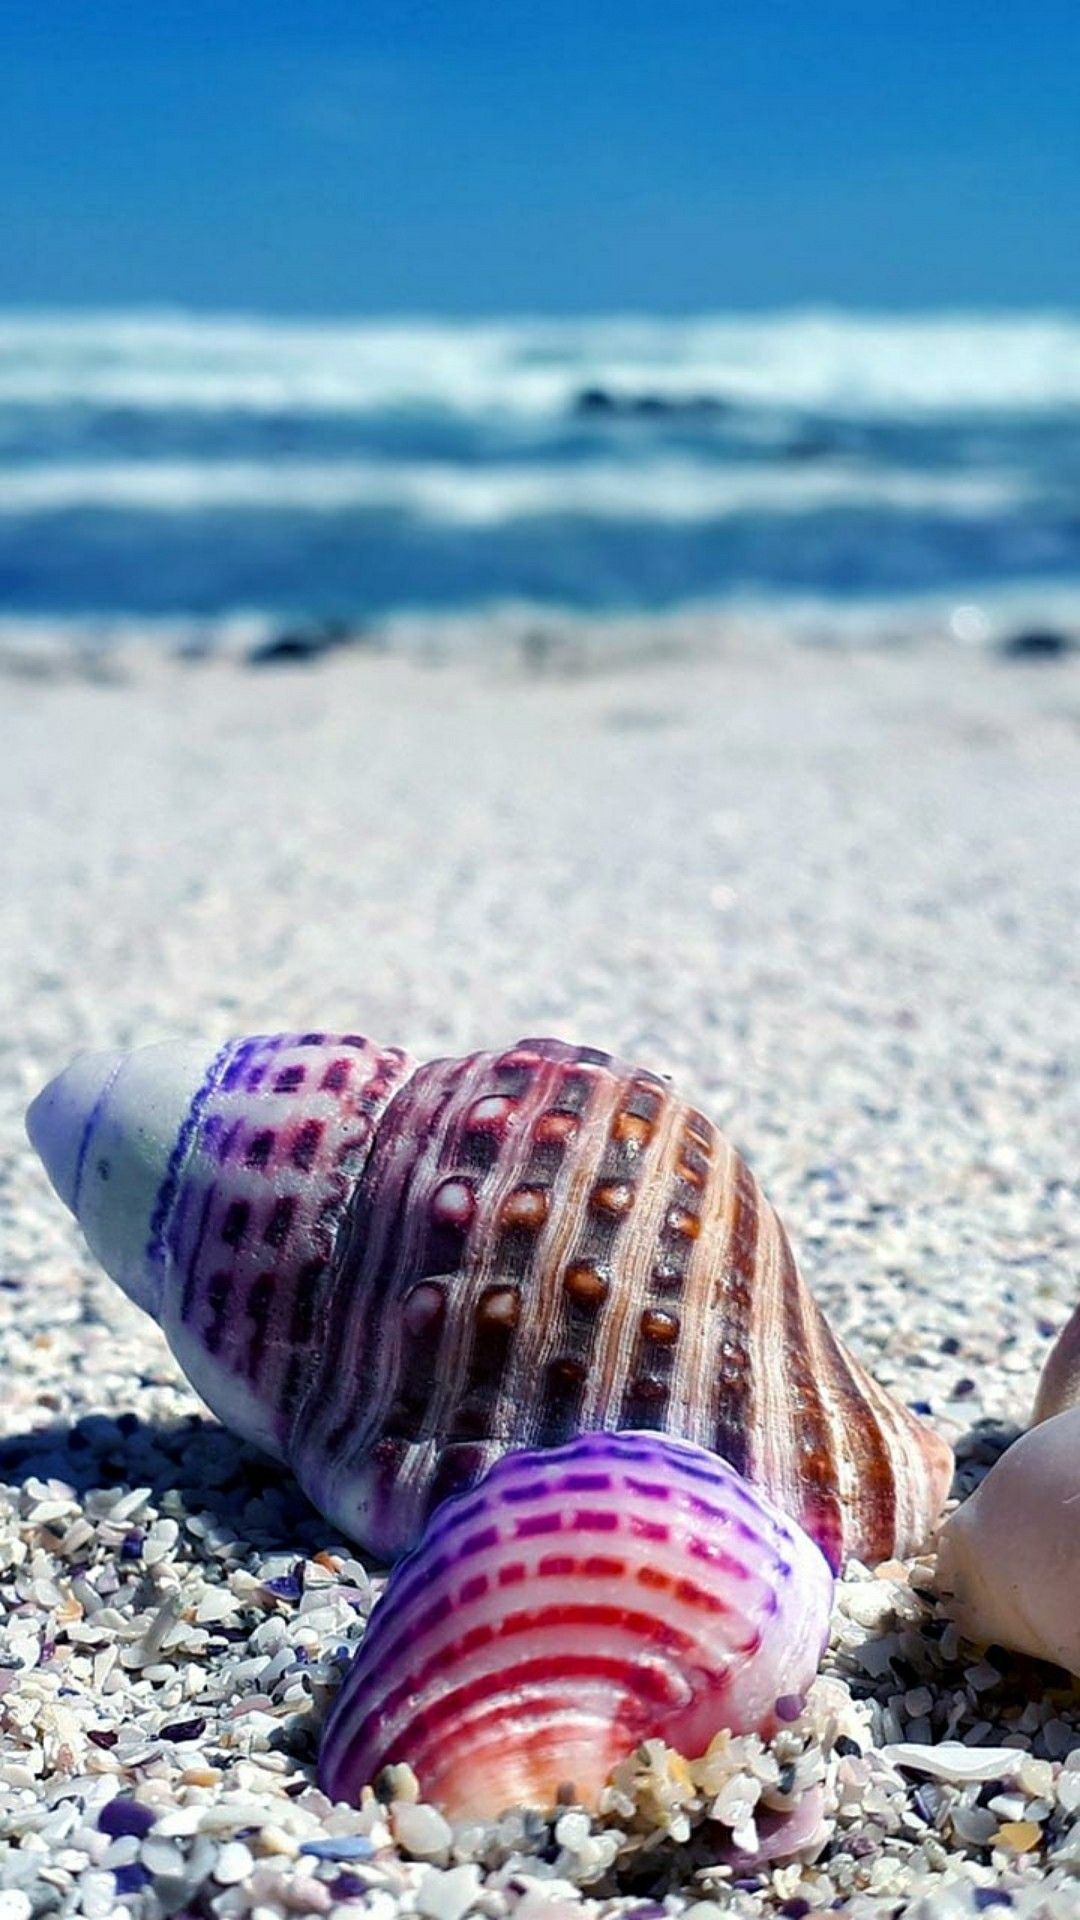 Sea Shell: Can be plain and smooth or come adorned with spikes and ridges and protrusions. 1080x1920 Full HD Wallpaper.